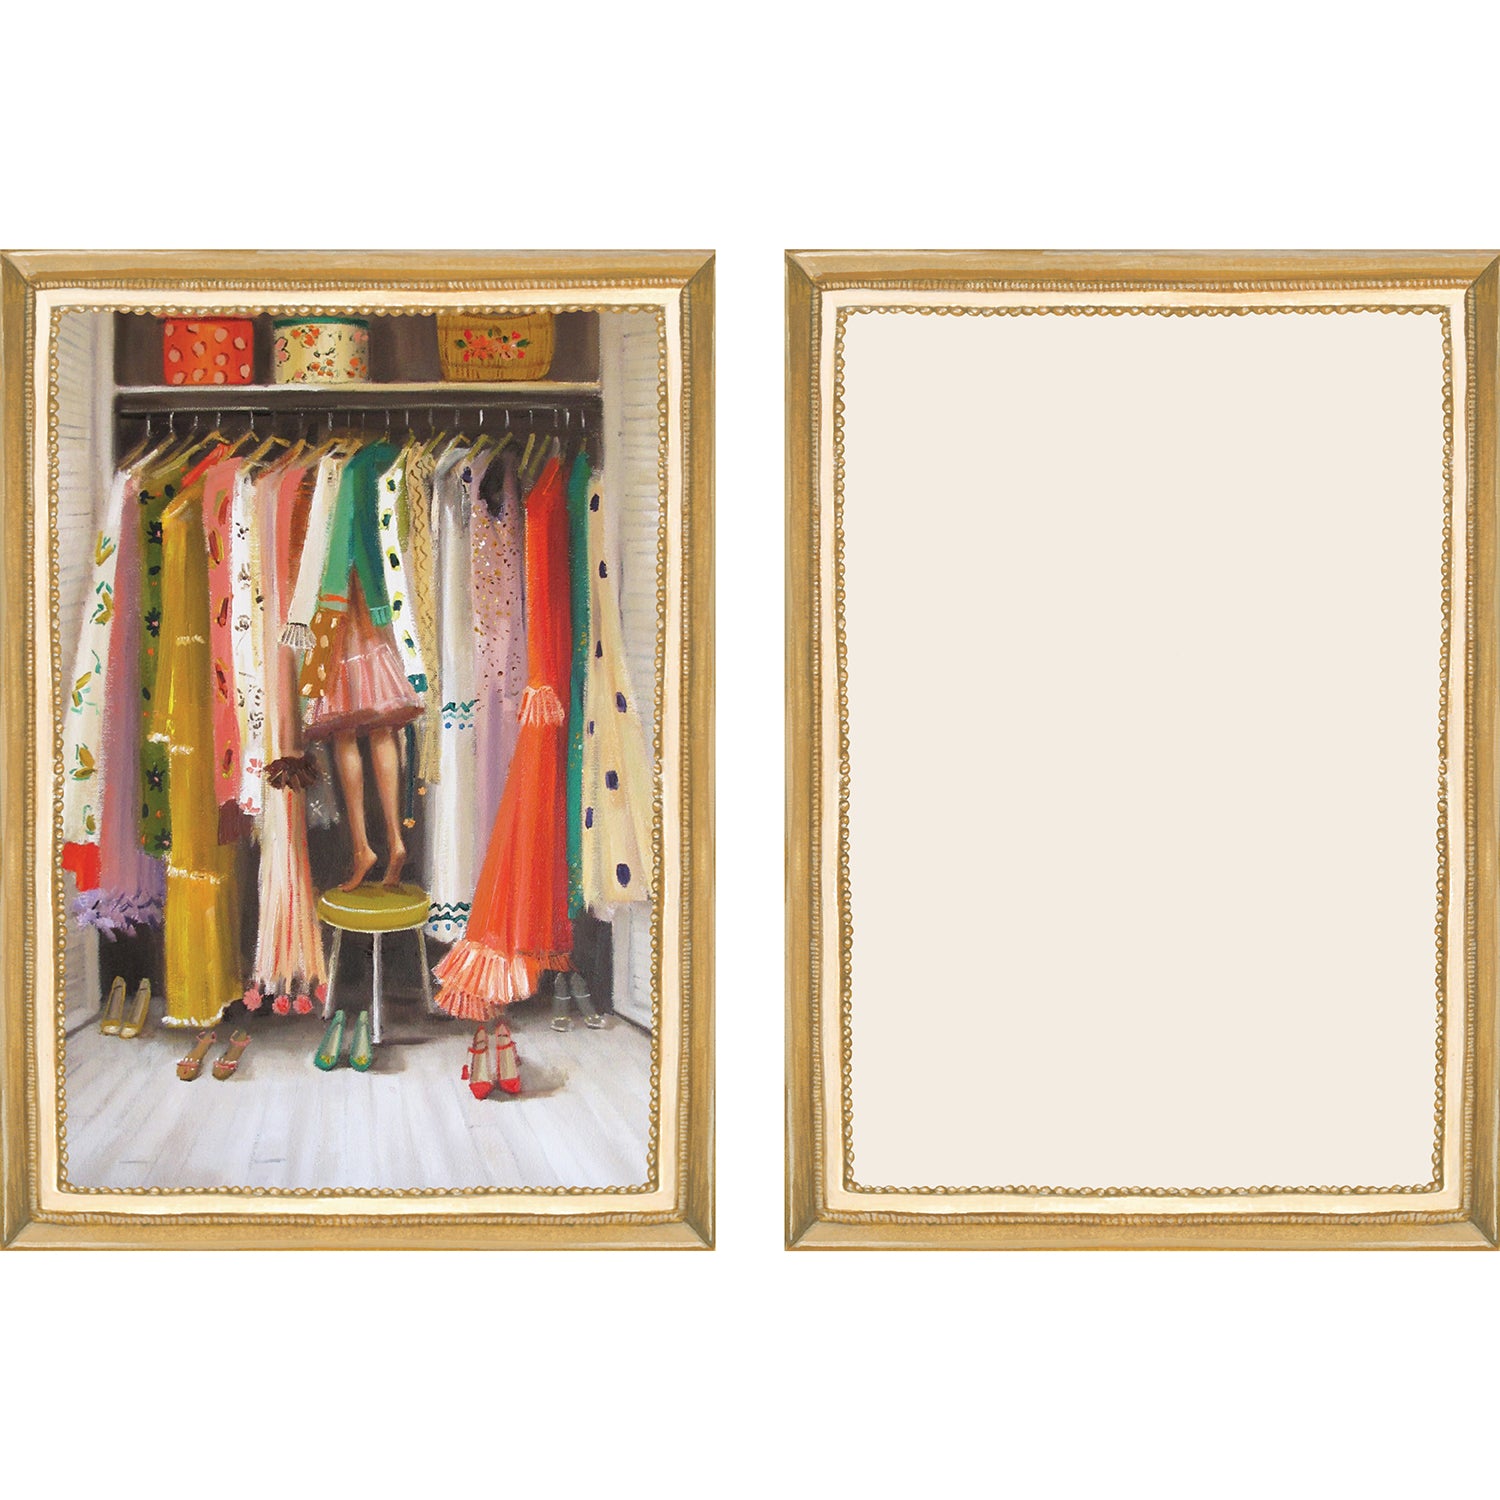 Two framed pictures of the Home Sweet Home Flat Note Boxed Set of 6 Cards by Hester &amp; Cook in a closet.